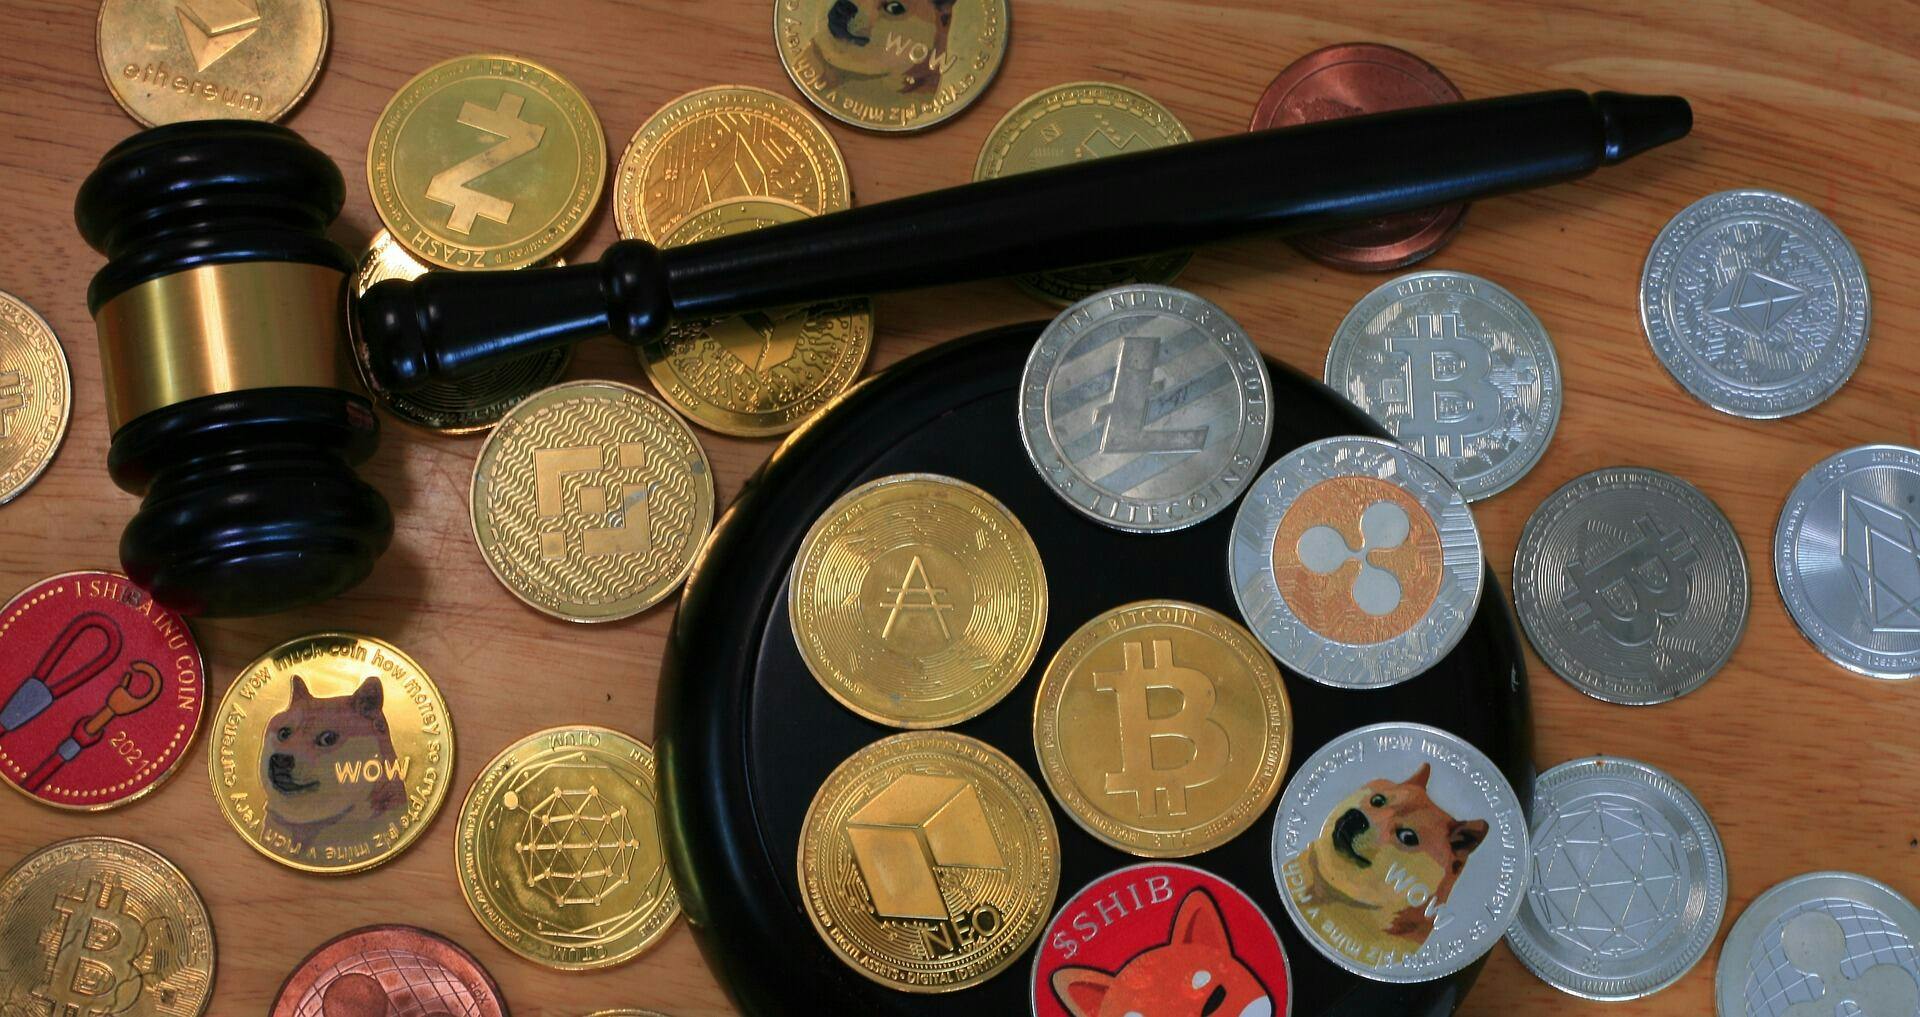 Twenty-five different shiny crypto coins that are both gold and silver on a table with a wooden gavel on the table with them.